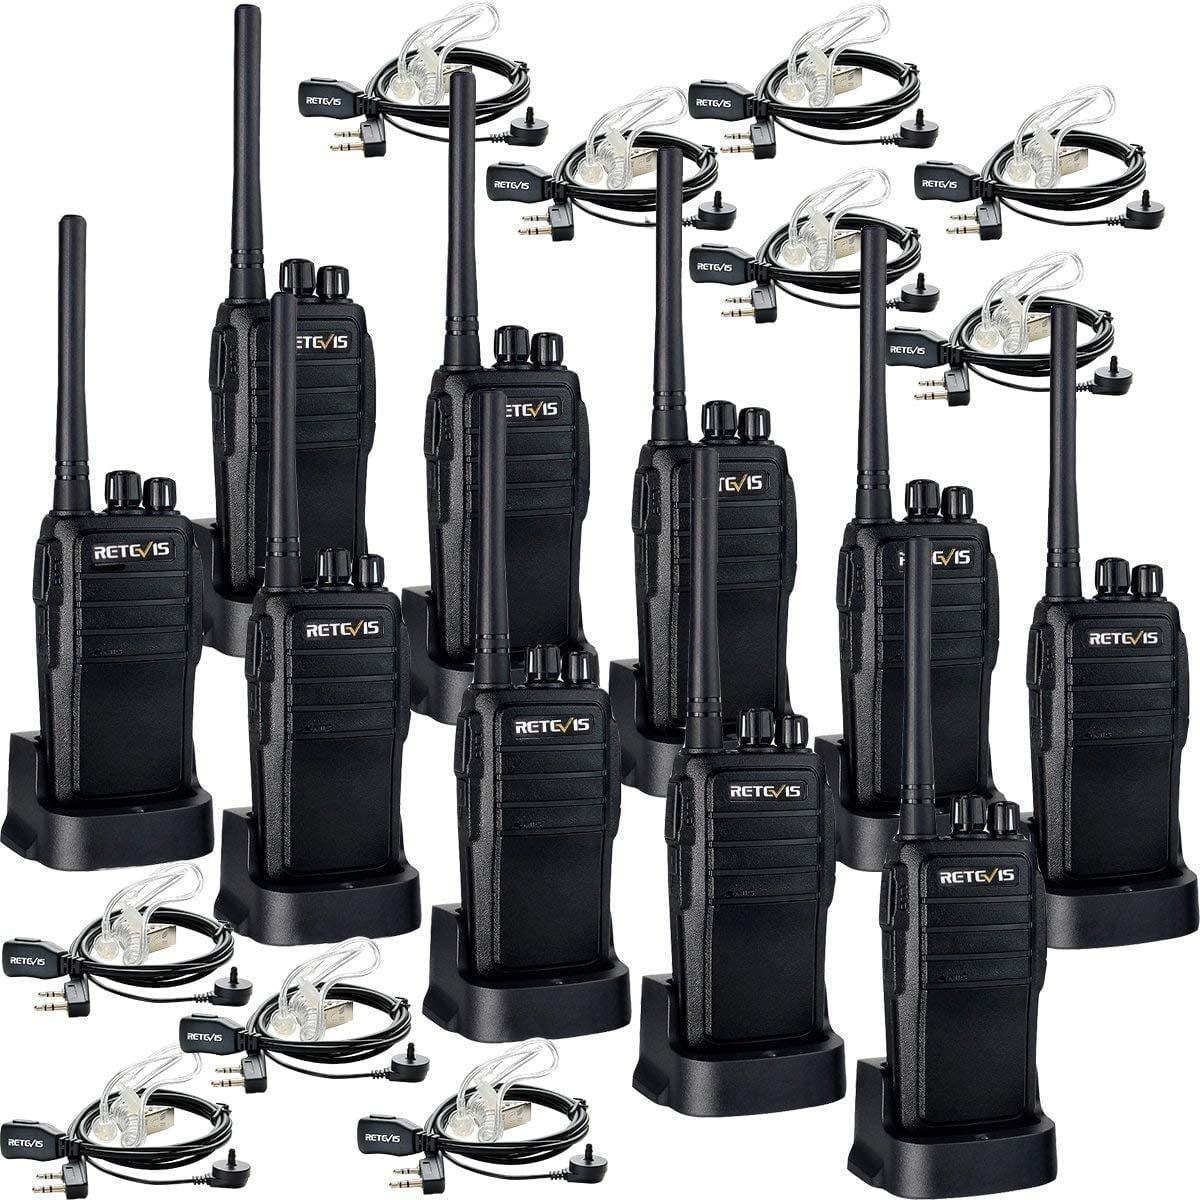 RT21 Walkie Talkie for Adult Rechargeable, Way Radios and Earpieces  (Black,10 Pack)